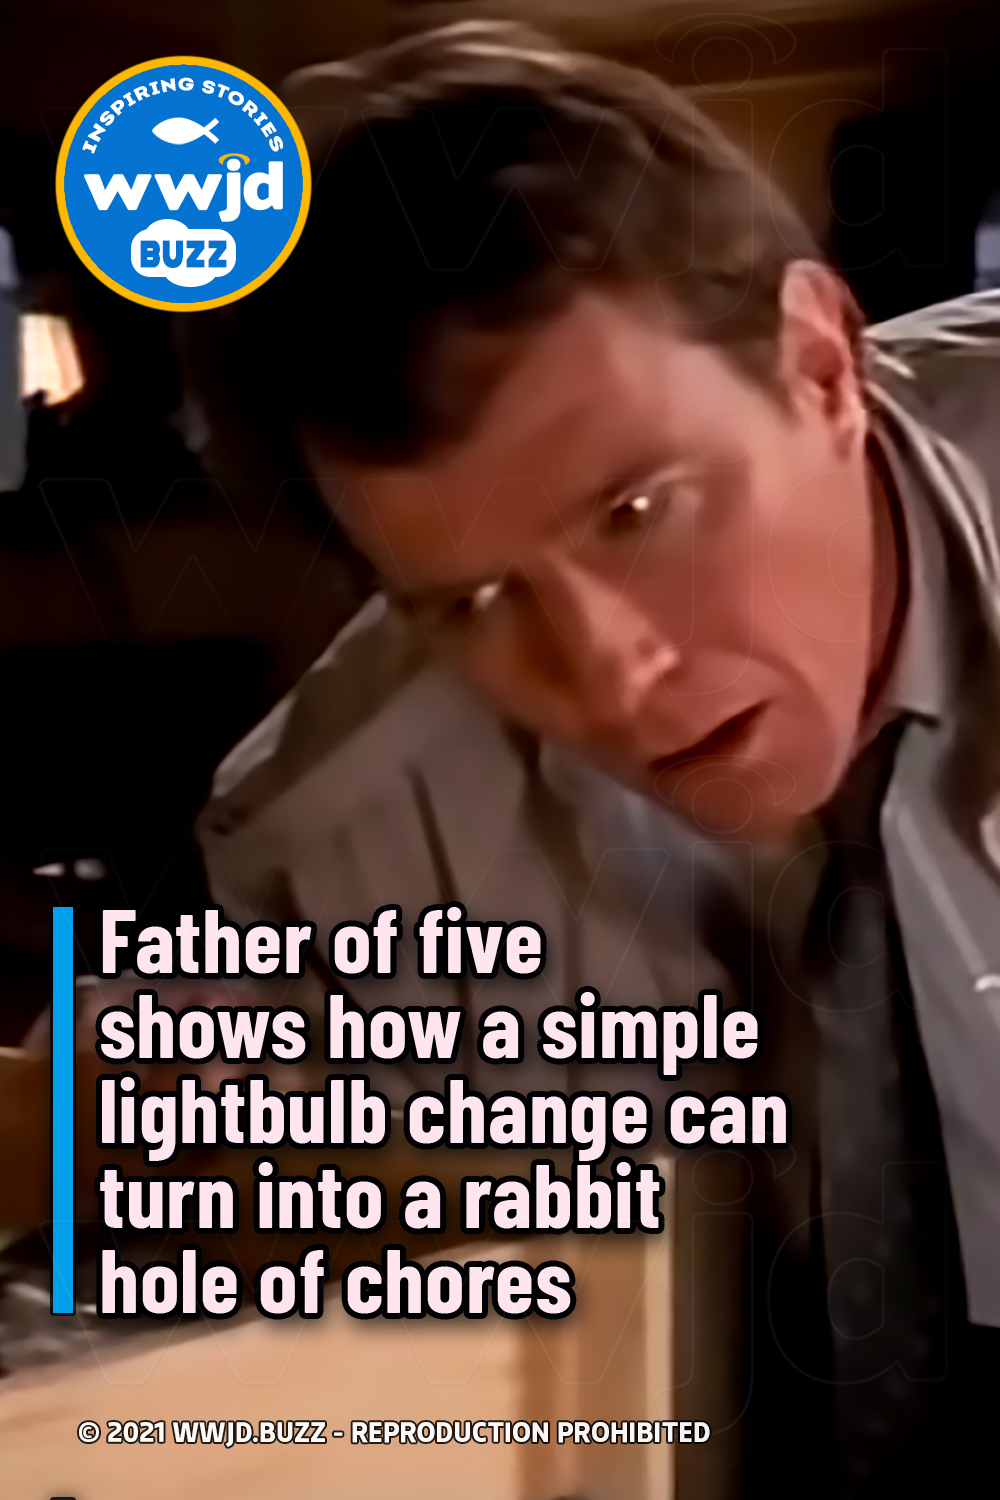 Father of five shows how a simple lightbulb change can turn into a rabbit hole of chores